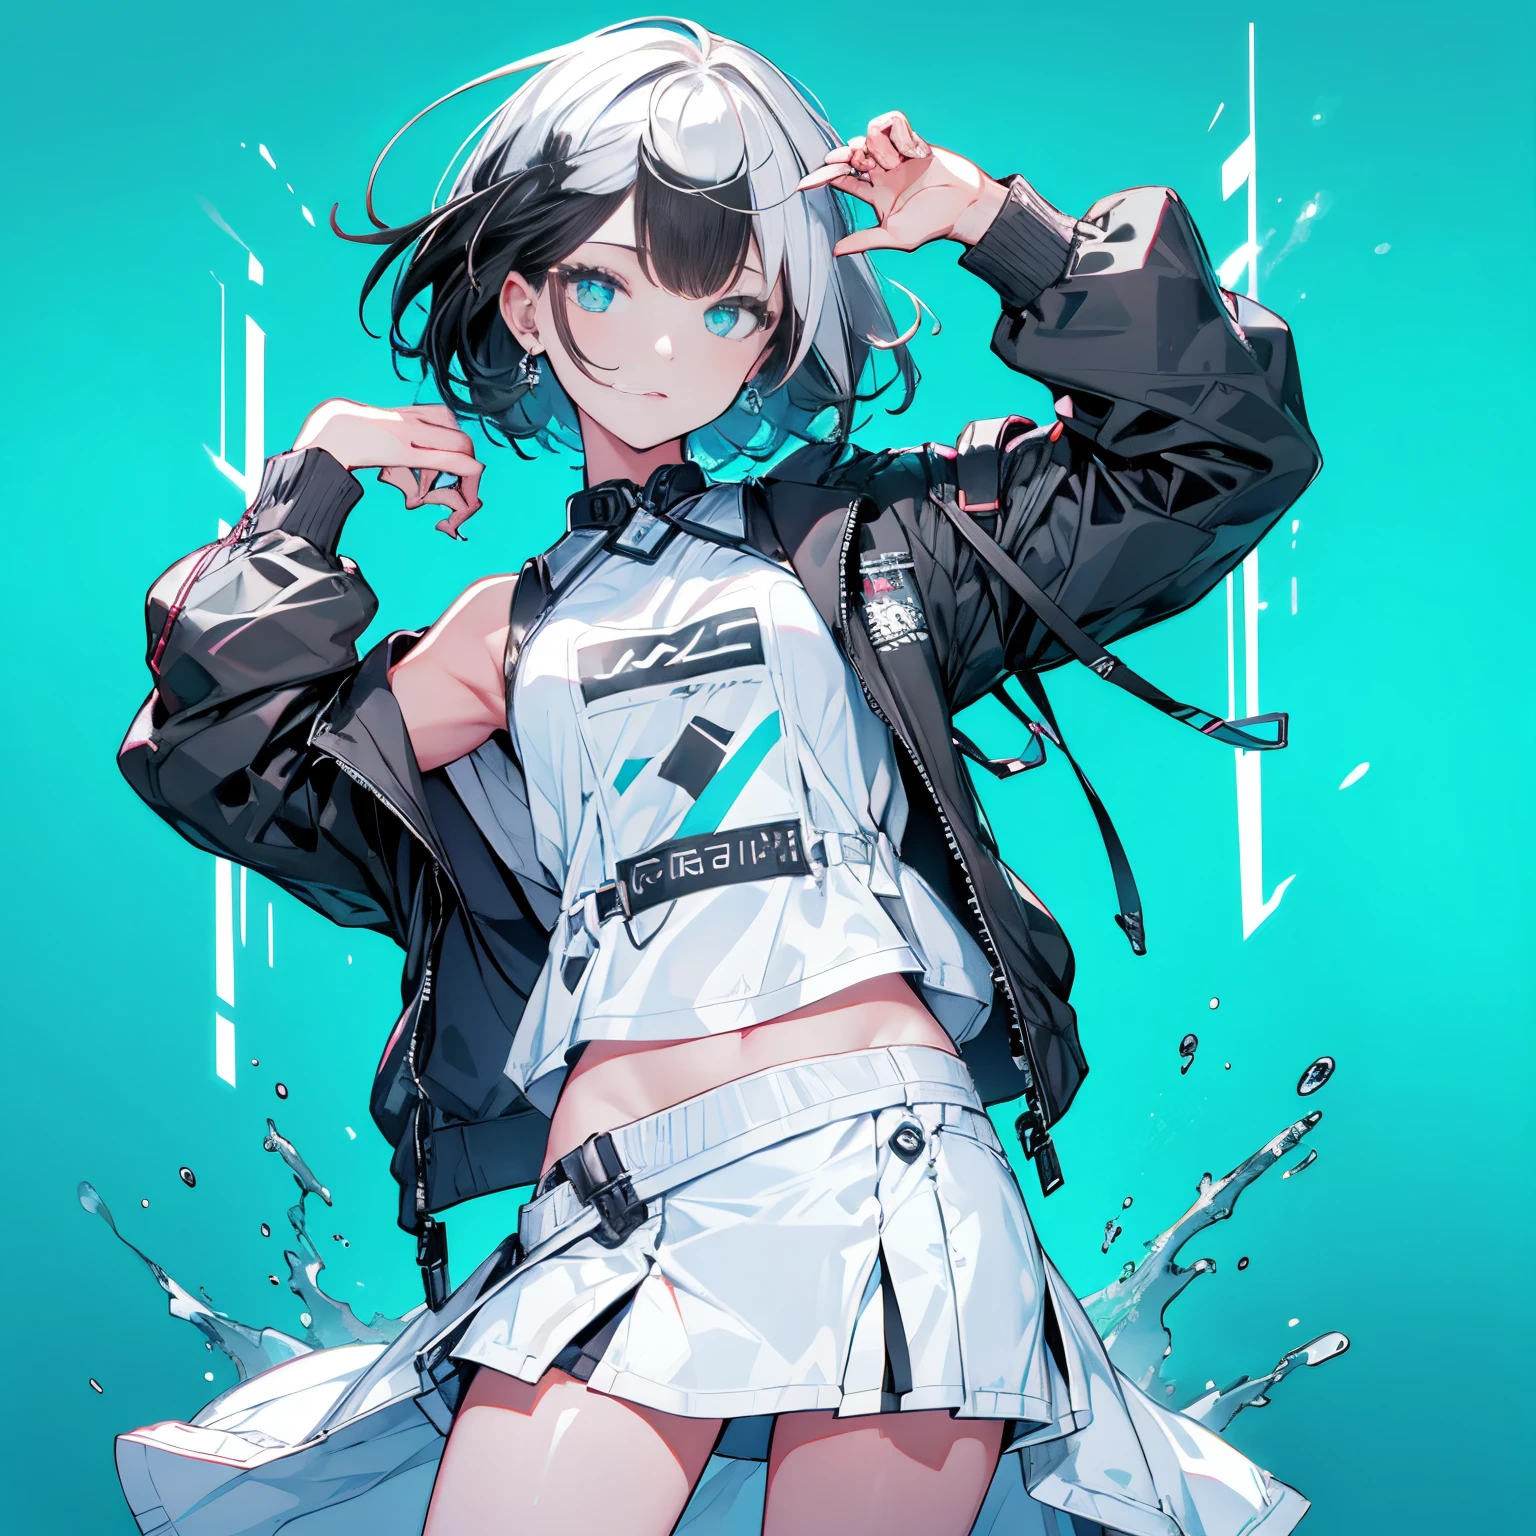 (masutepiece:1.2, Best Quality),  [1 girl in, expressioness, Turquoise eyes, black hair, half short cut hair,White Jacket,jacket comes off, ,Upper body]  (Gray white background:1.2),